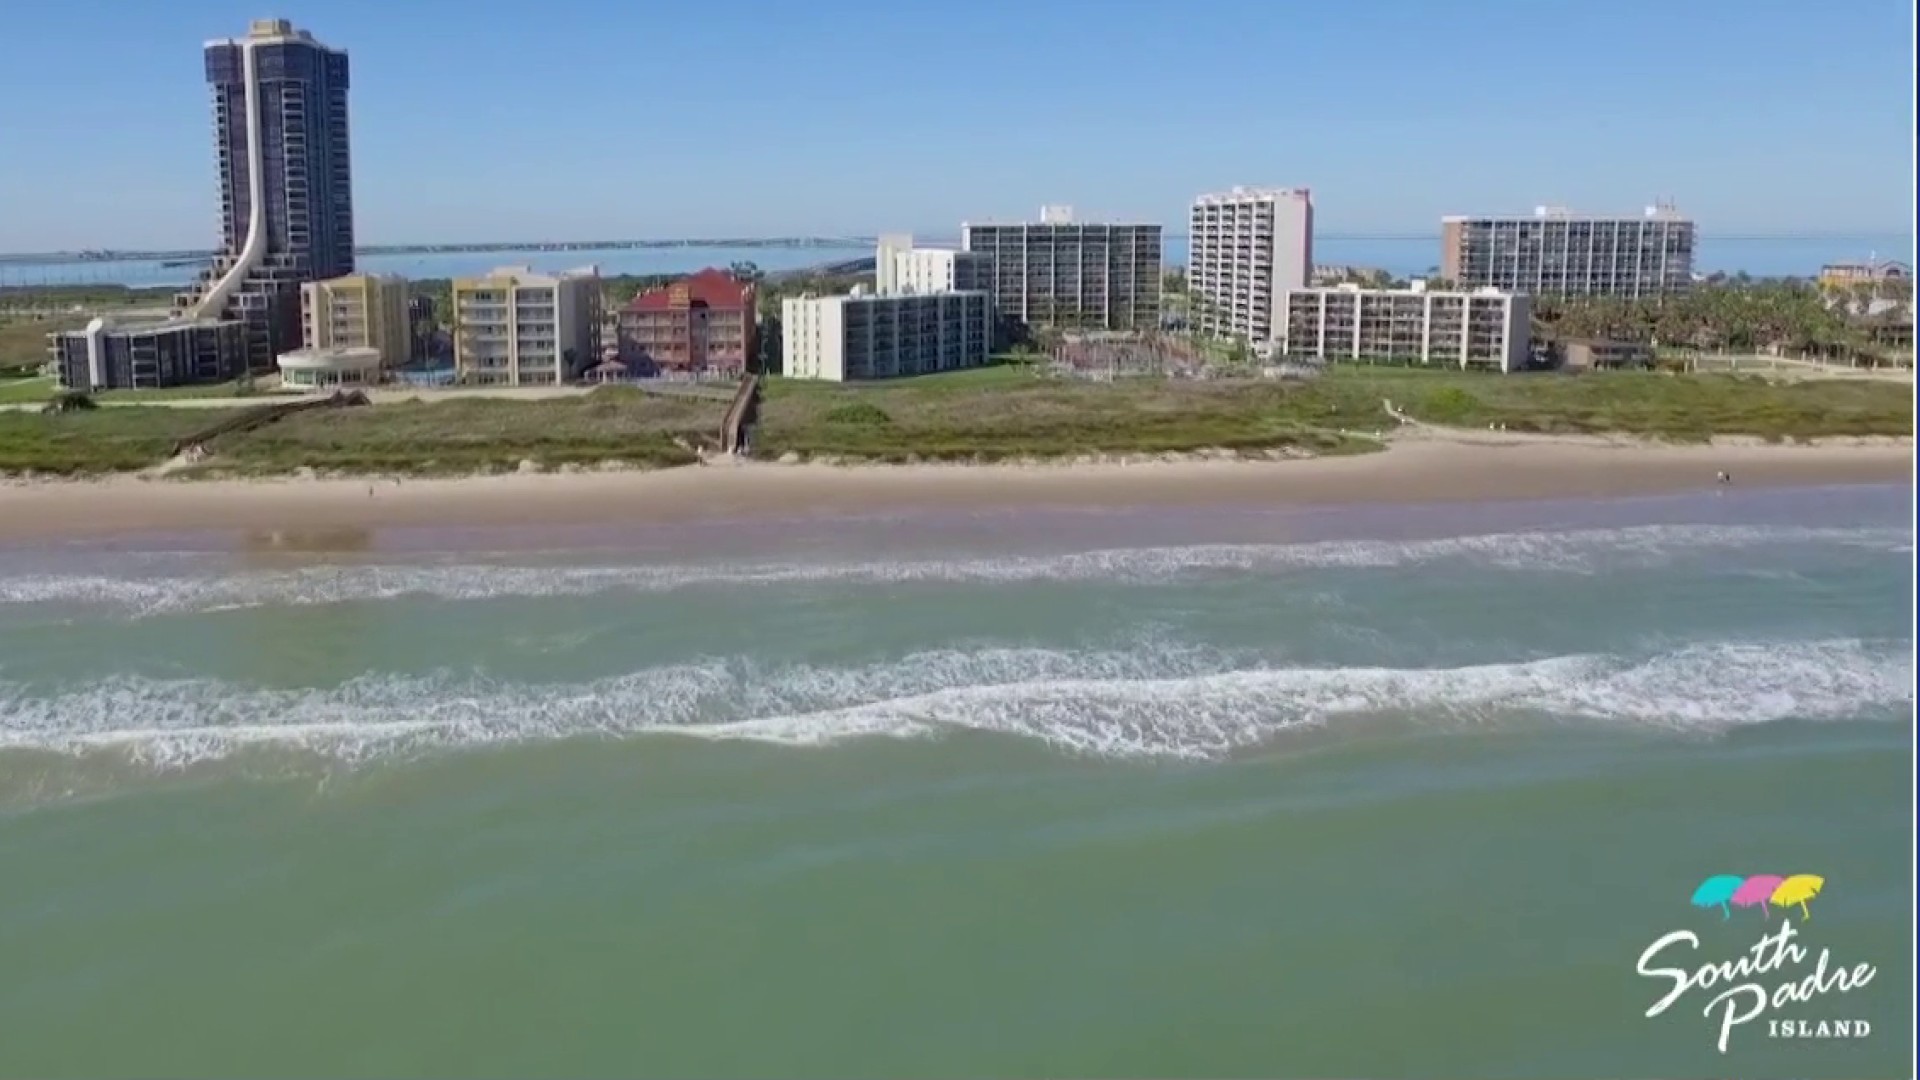 Top attractions, places to visit in South Padre Island ?